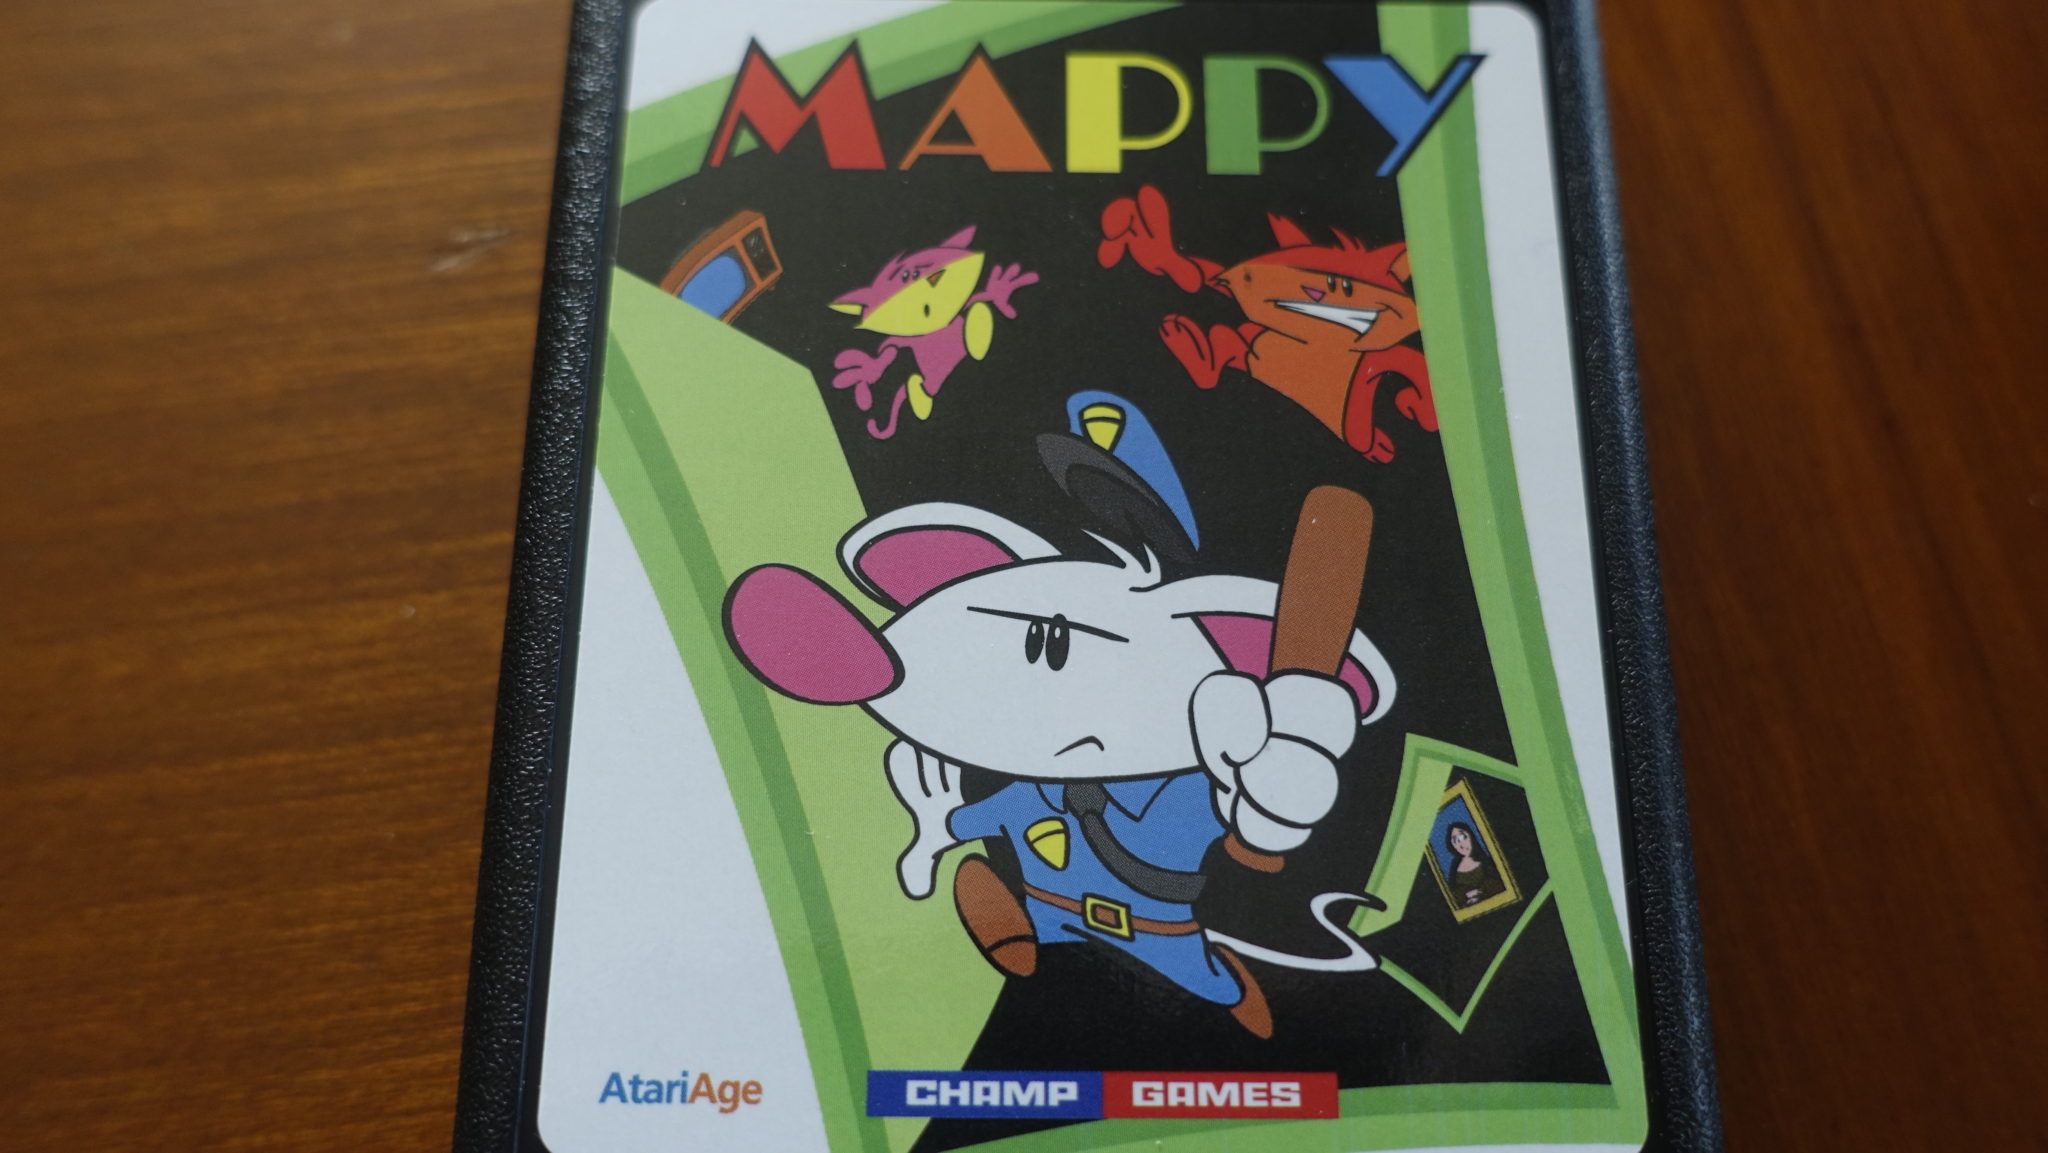 Mappy Atari 2600 homebrew review by Champ Games!